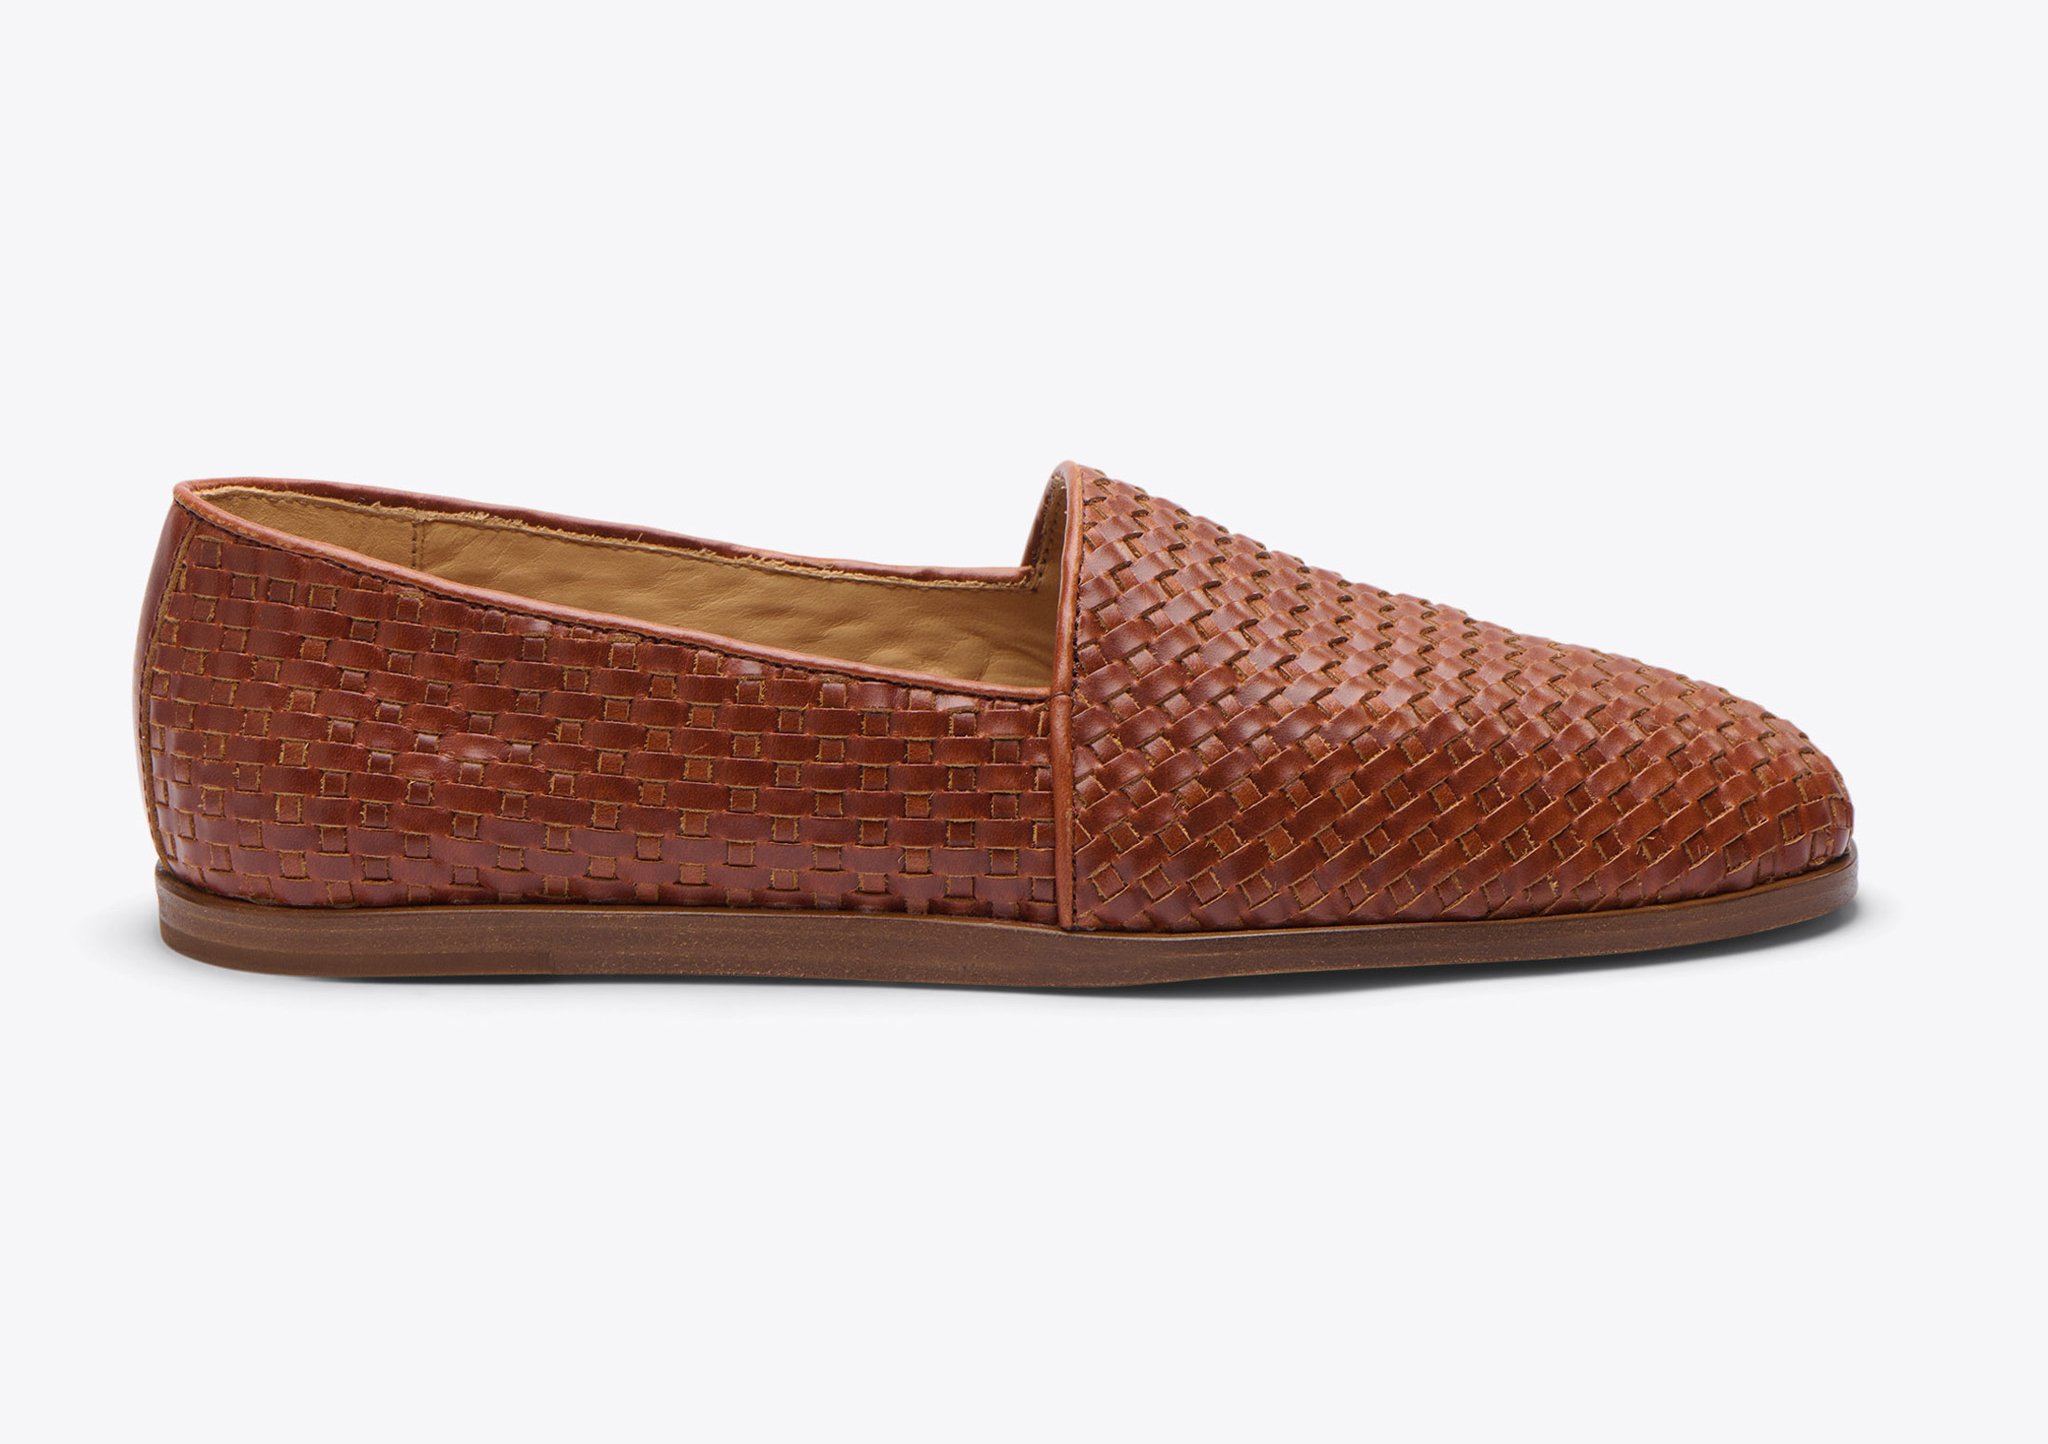 Nisolo Mara Woven Slip On Woven Brandy - Every Nisolo product is built on the foundation of comfort, function, and design. 